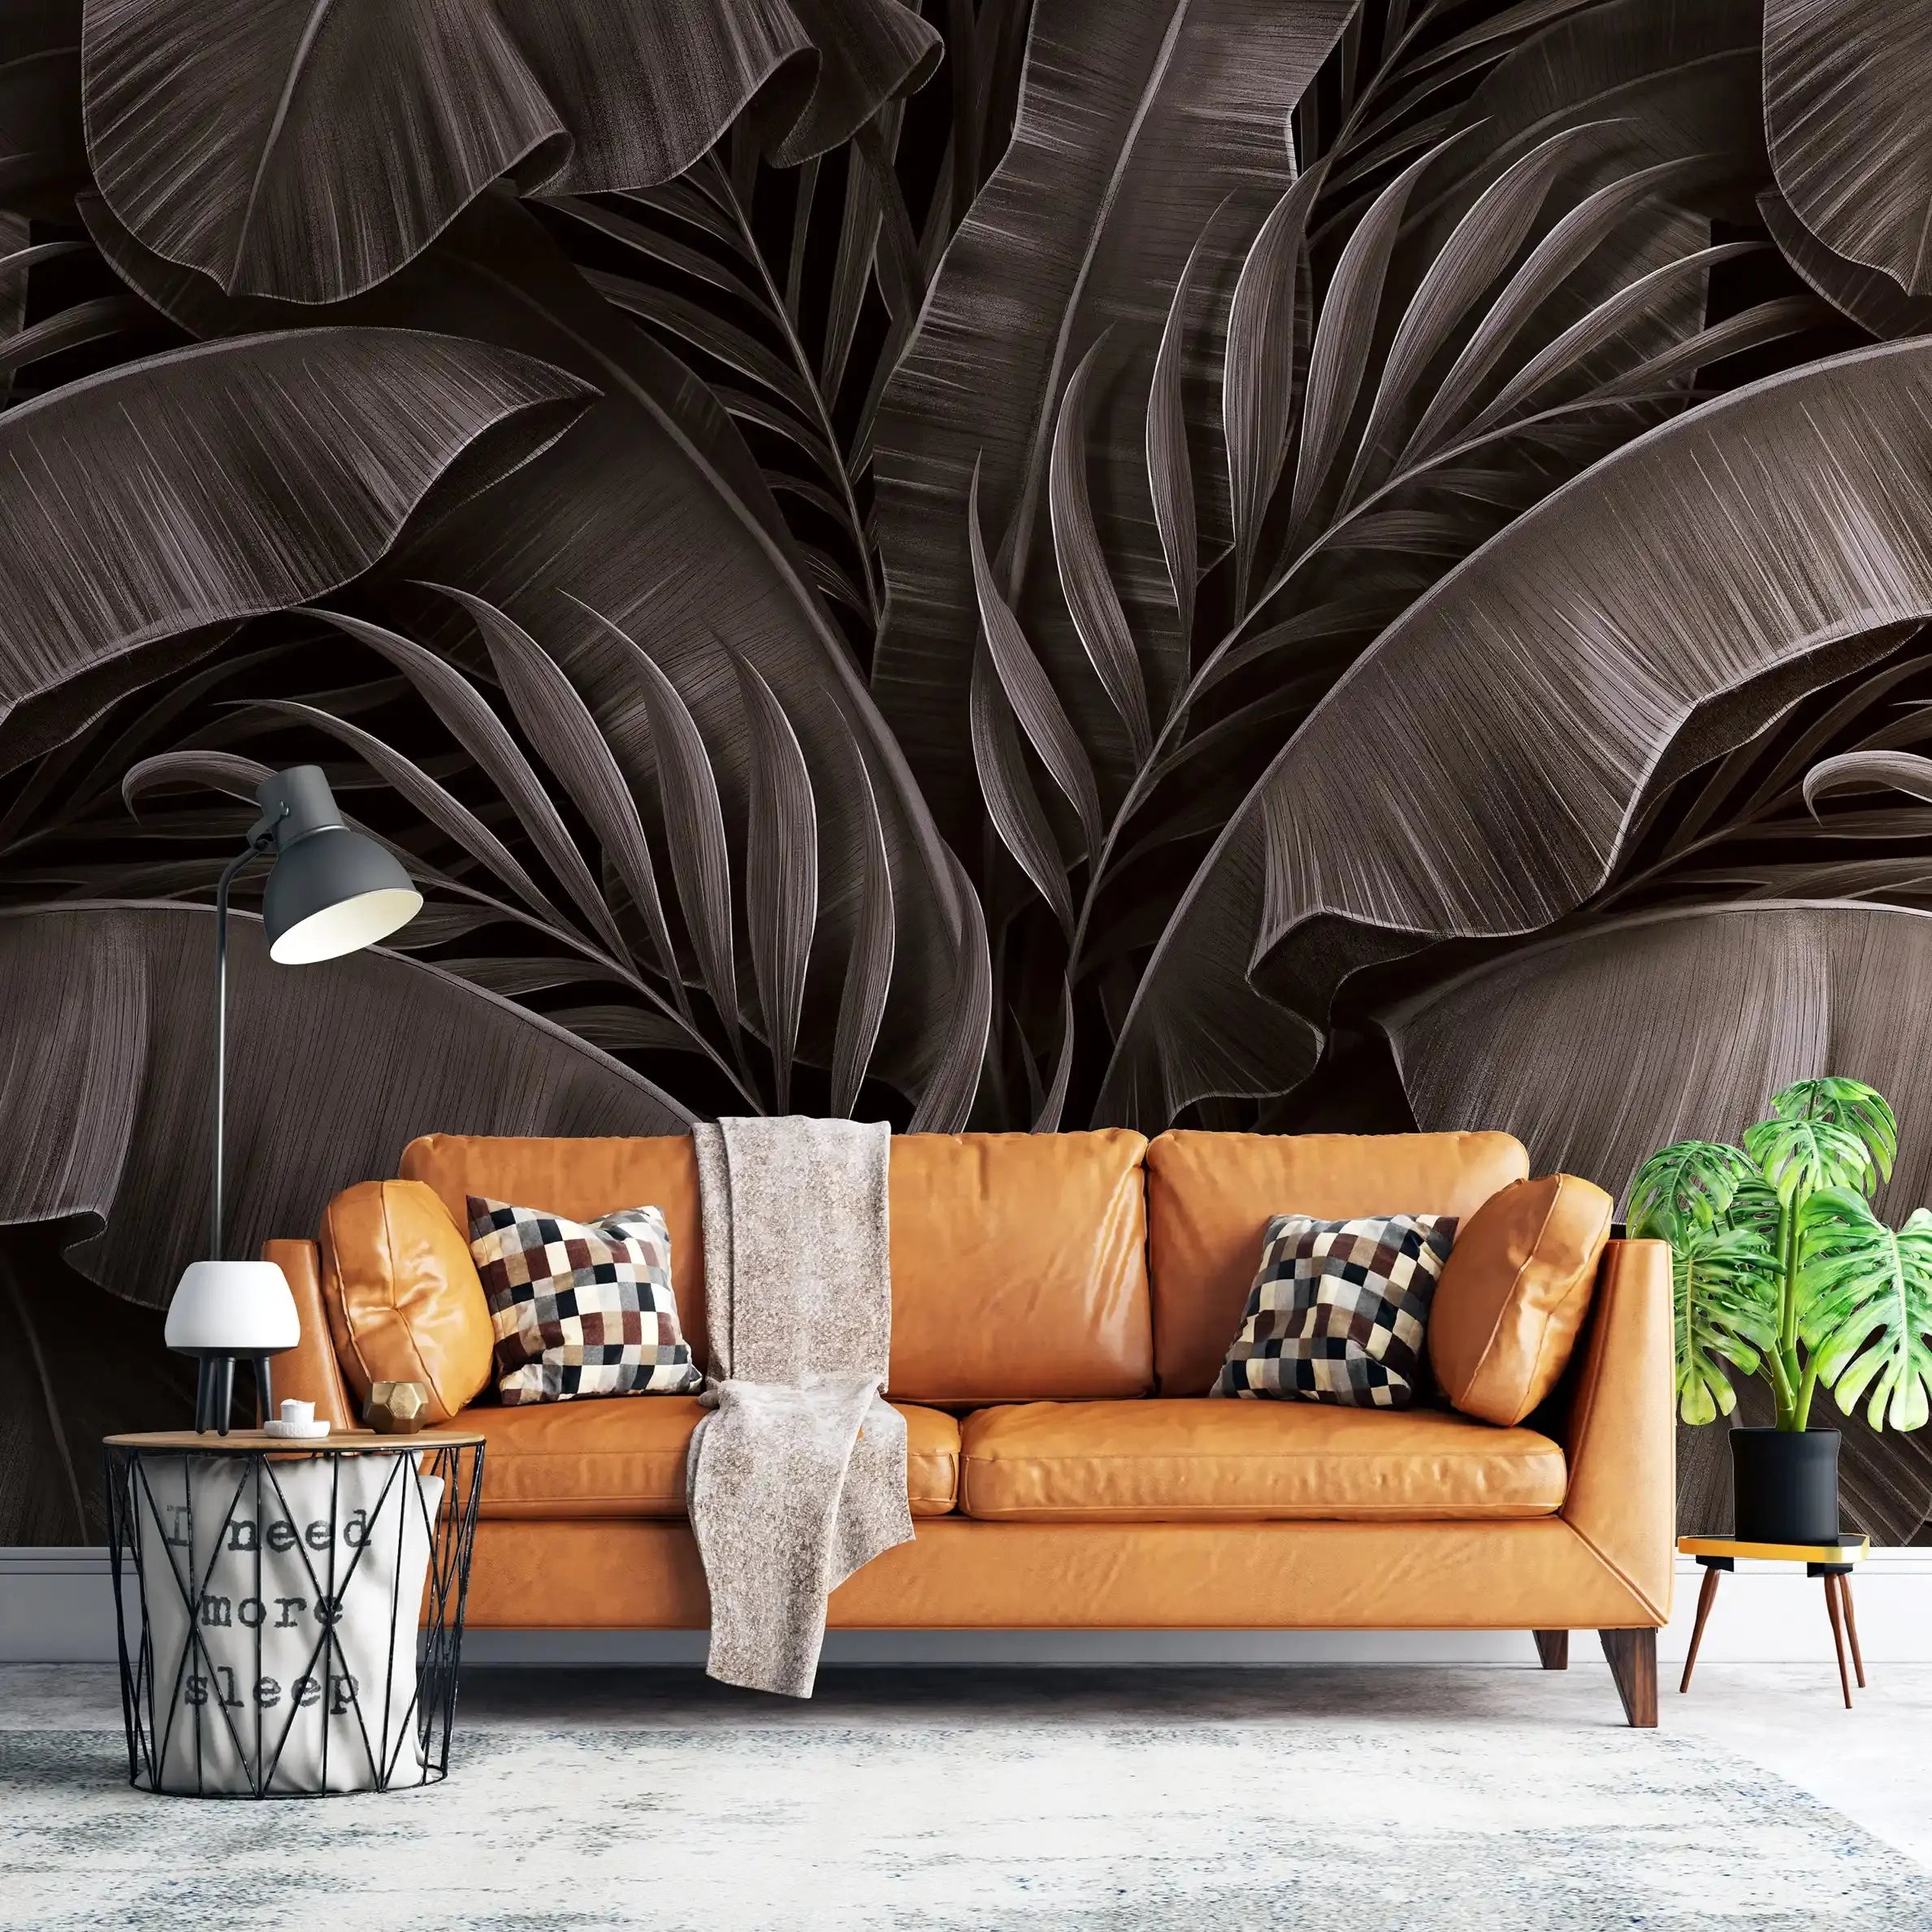 3026-D / Tropical Jungle Leaves Wallpaper, Peel and Stick Mural, Ideal for Bathroom, Bedroom, and Kitchen - Artevella